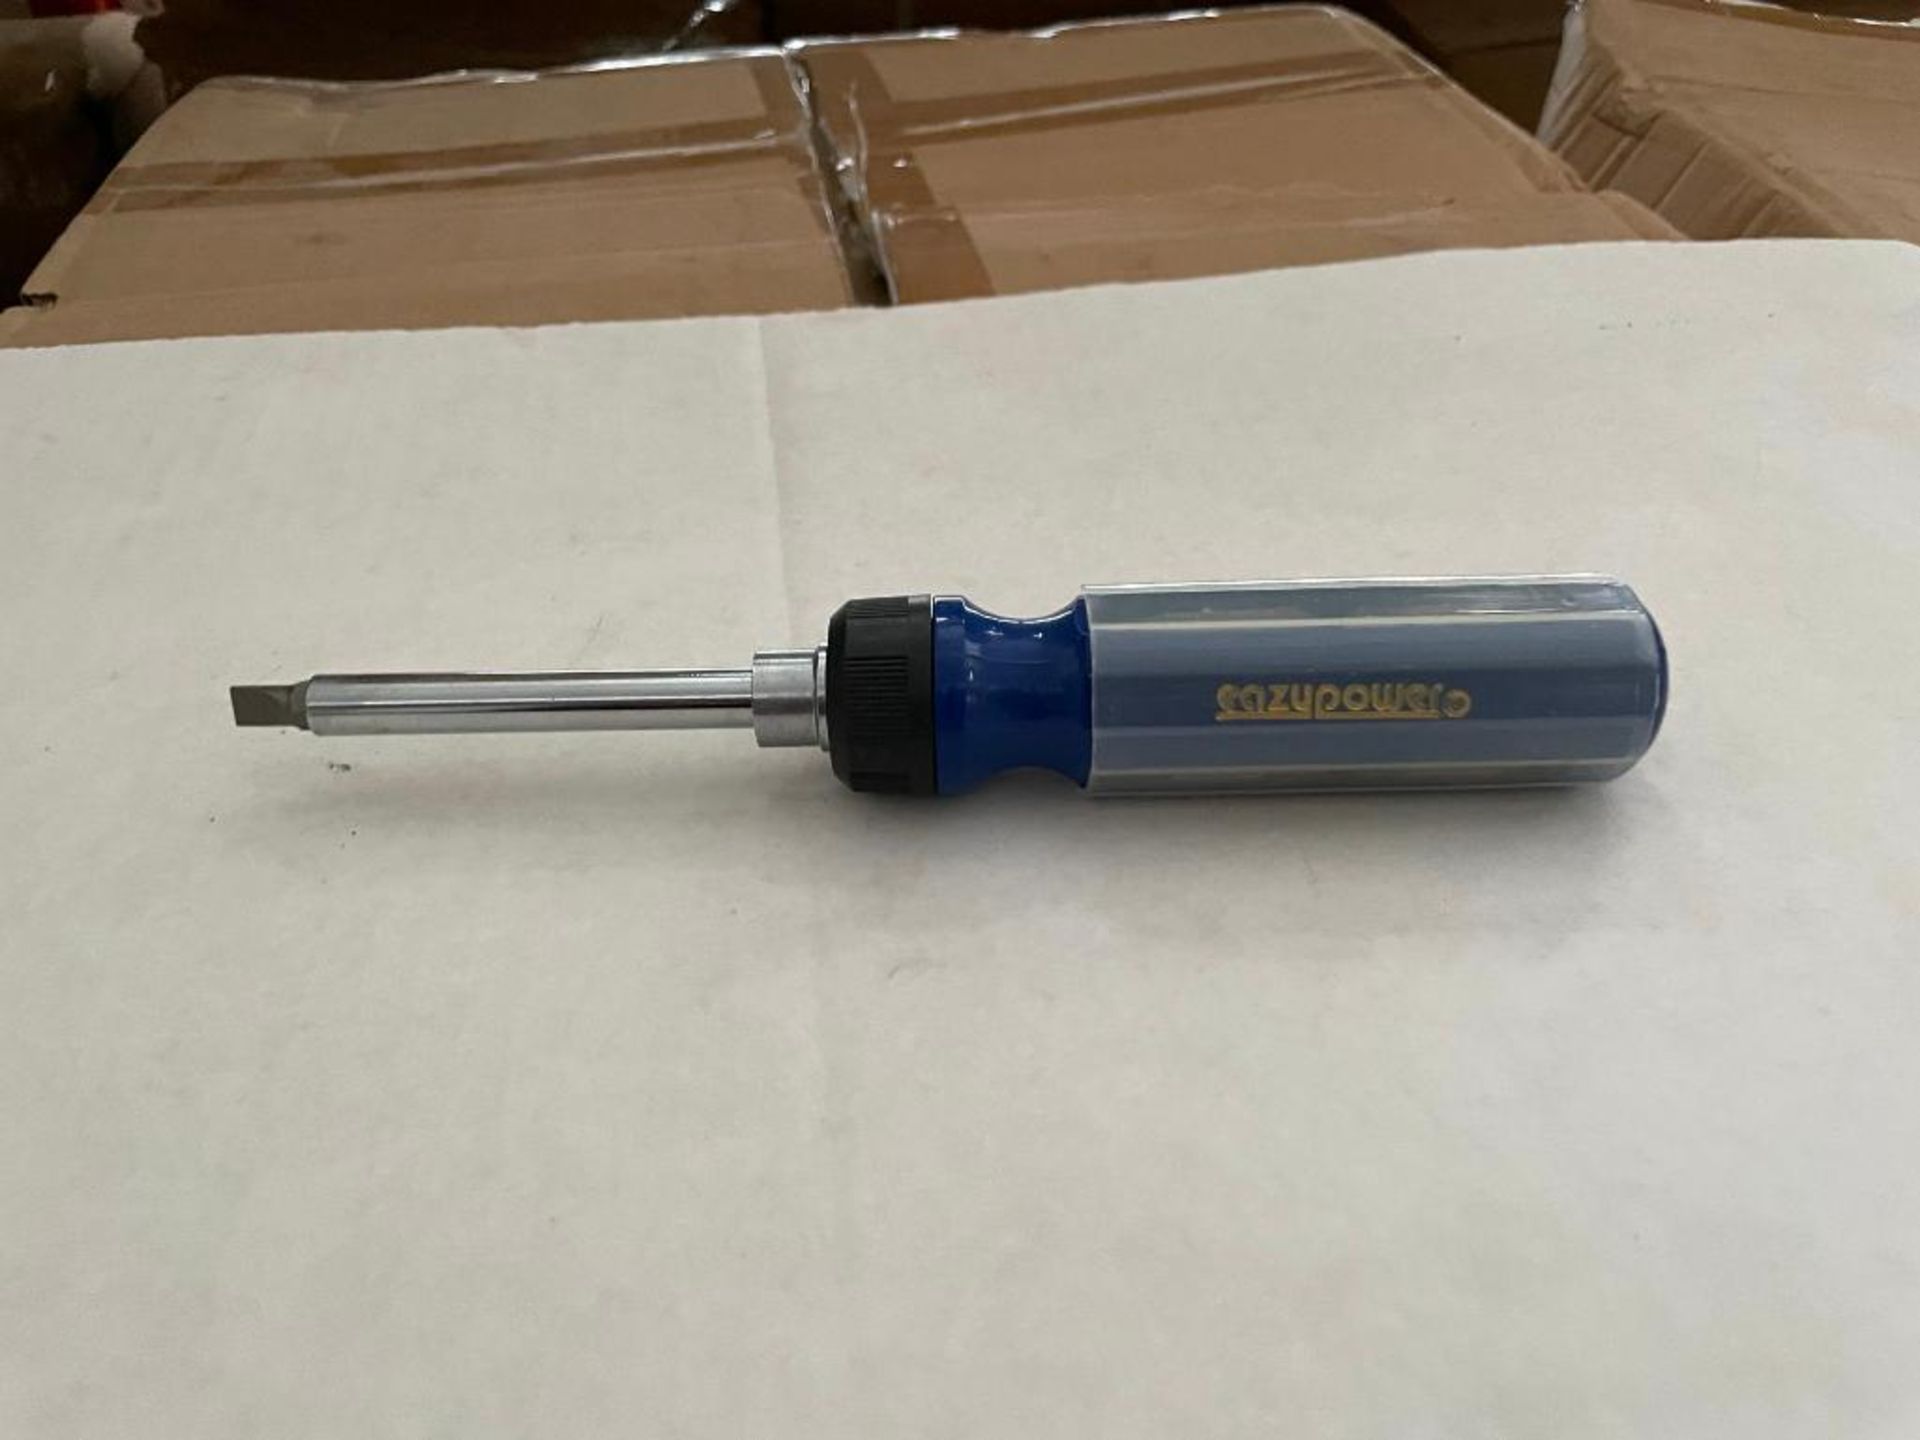 300CT 25-IN-1 RATCHETING SCREWDRIVERS BRAND/MODEL EAZYPOWER 88065 ADDITIONAL INFO TOTAL LOT RETAIL P - Image 3 of 4